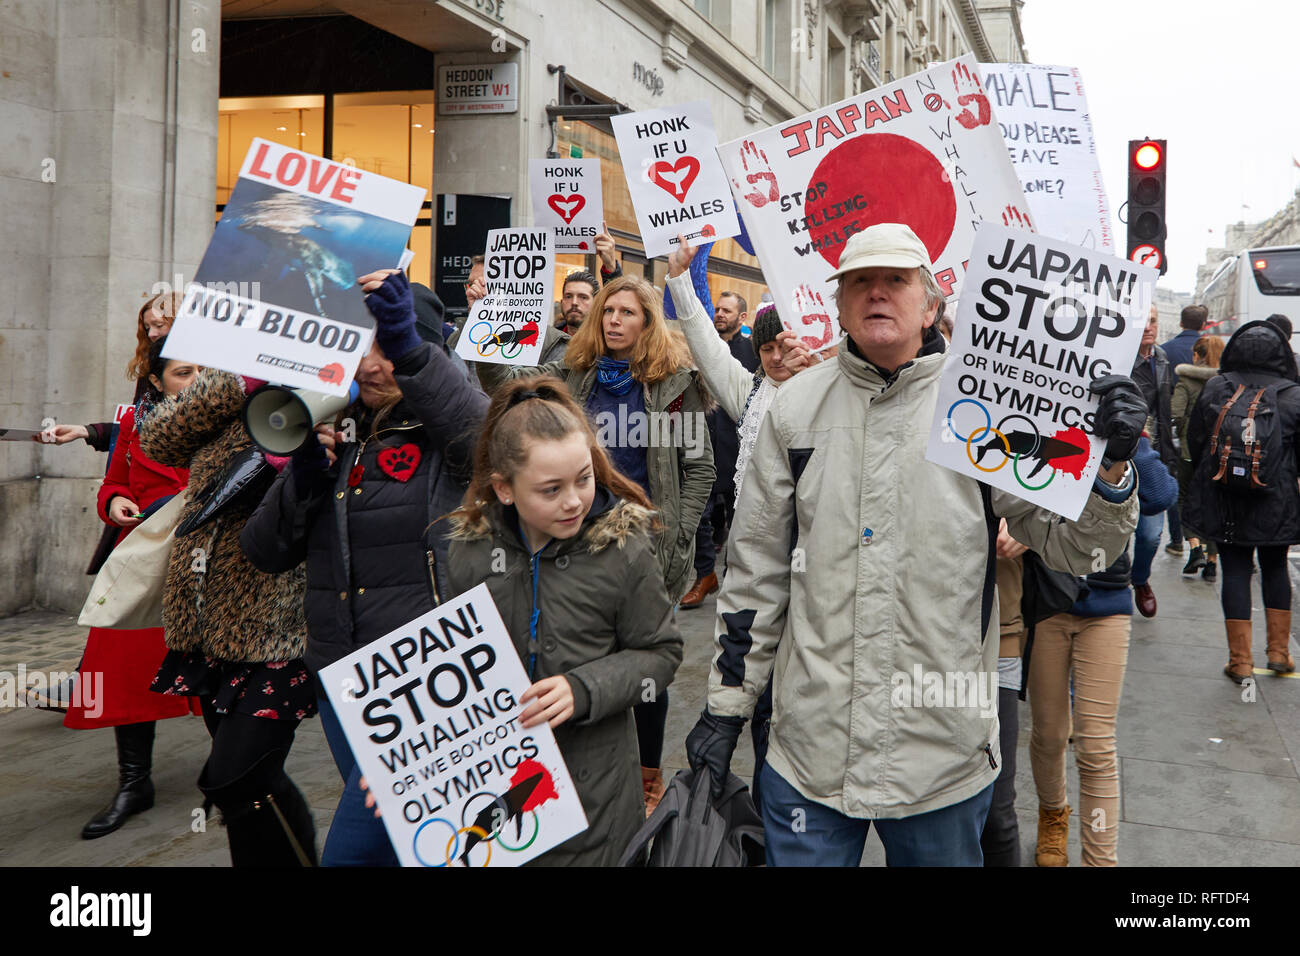 London, UK. - Jan 26, 2019: Protestors marched in London to protest against Japan resuming commercial whaling. Credit: Kevin J. Frost/Alamy Live News Stock Photo